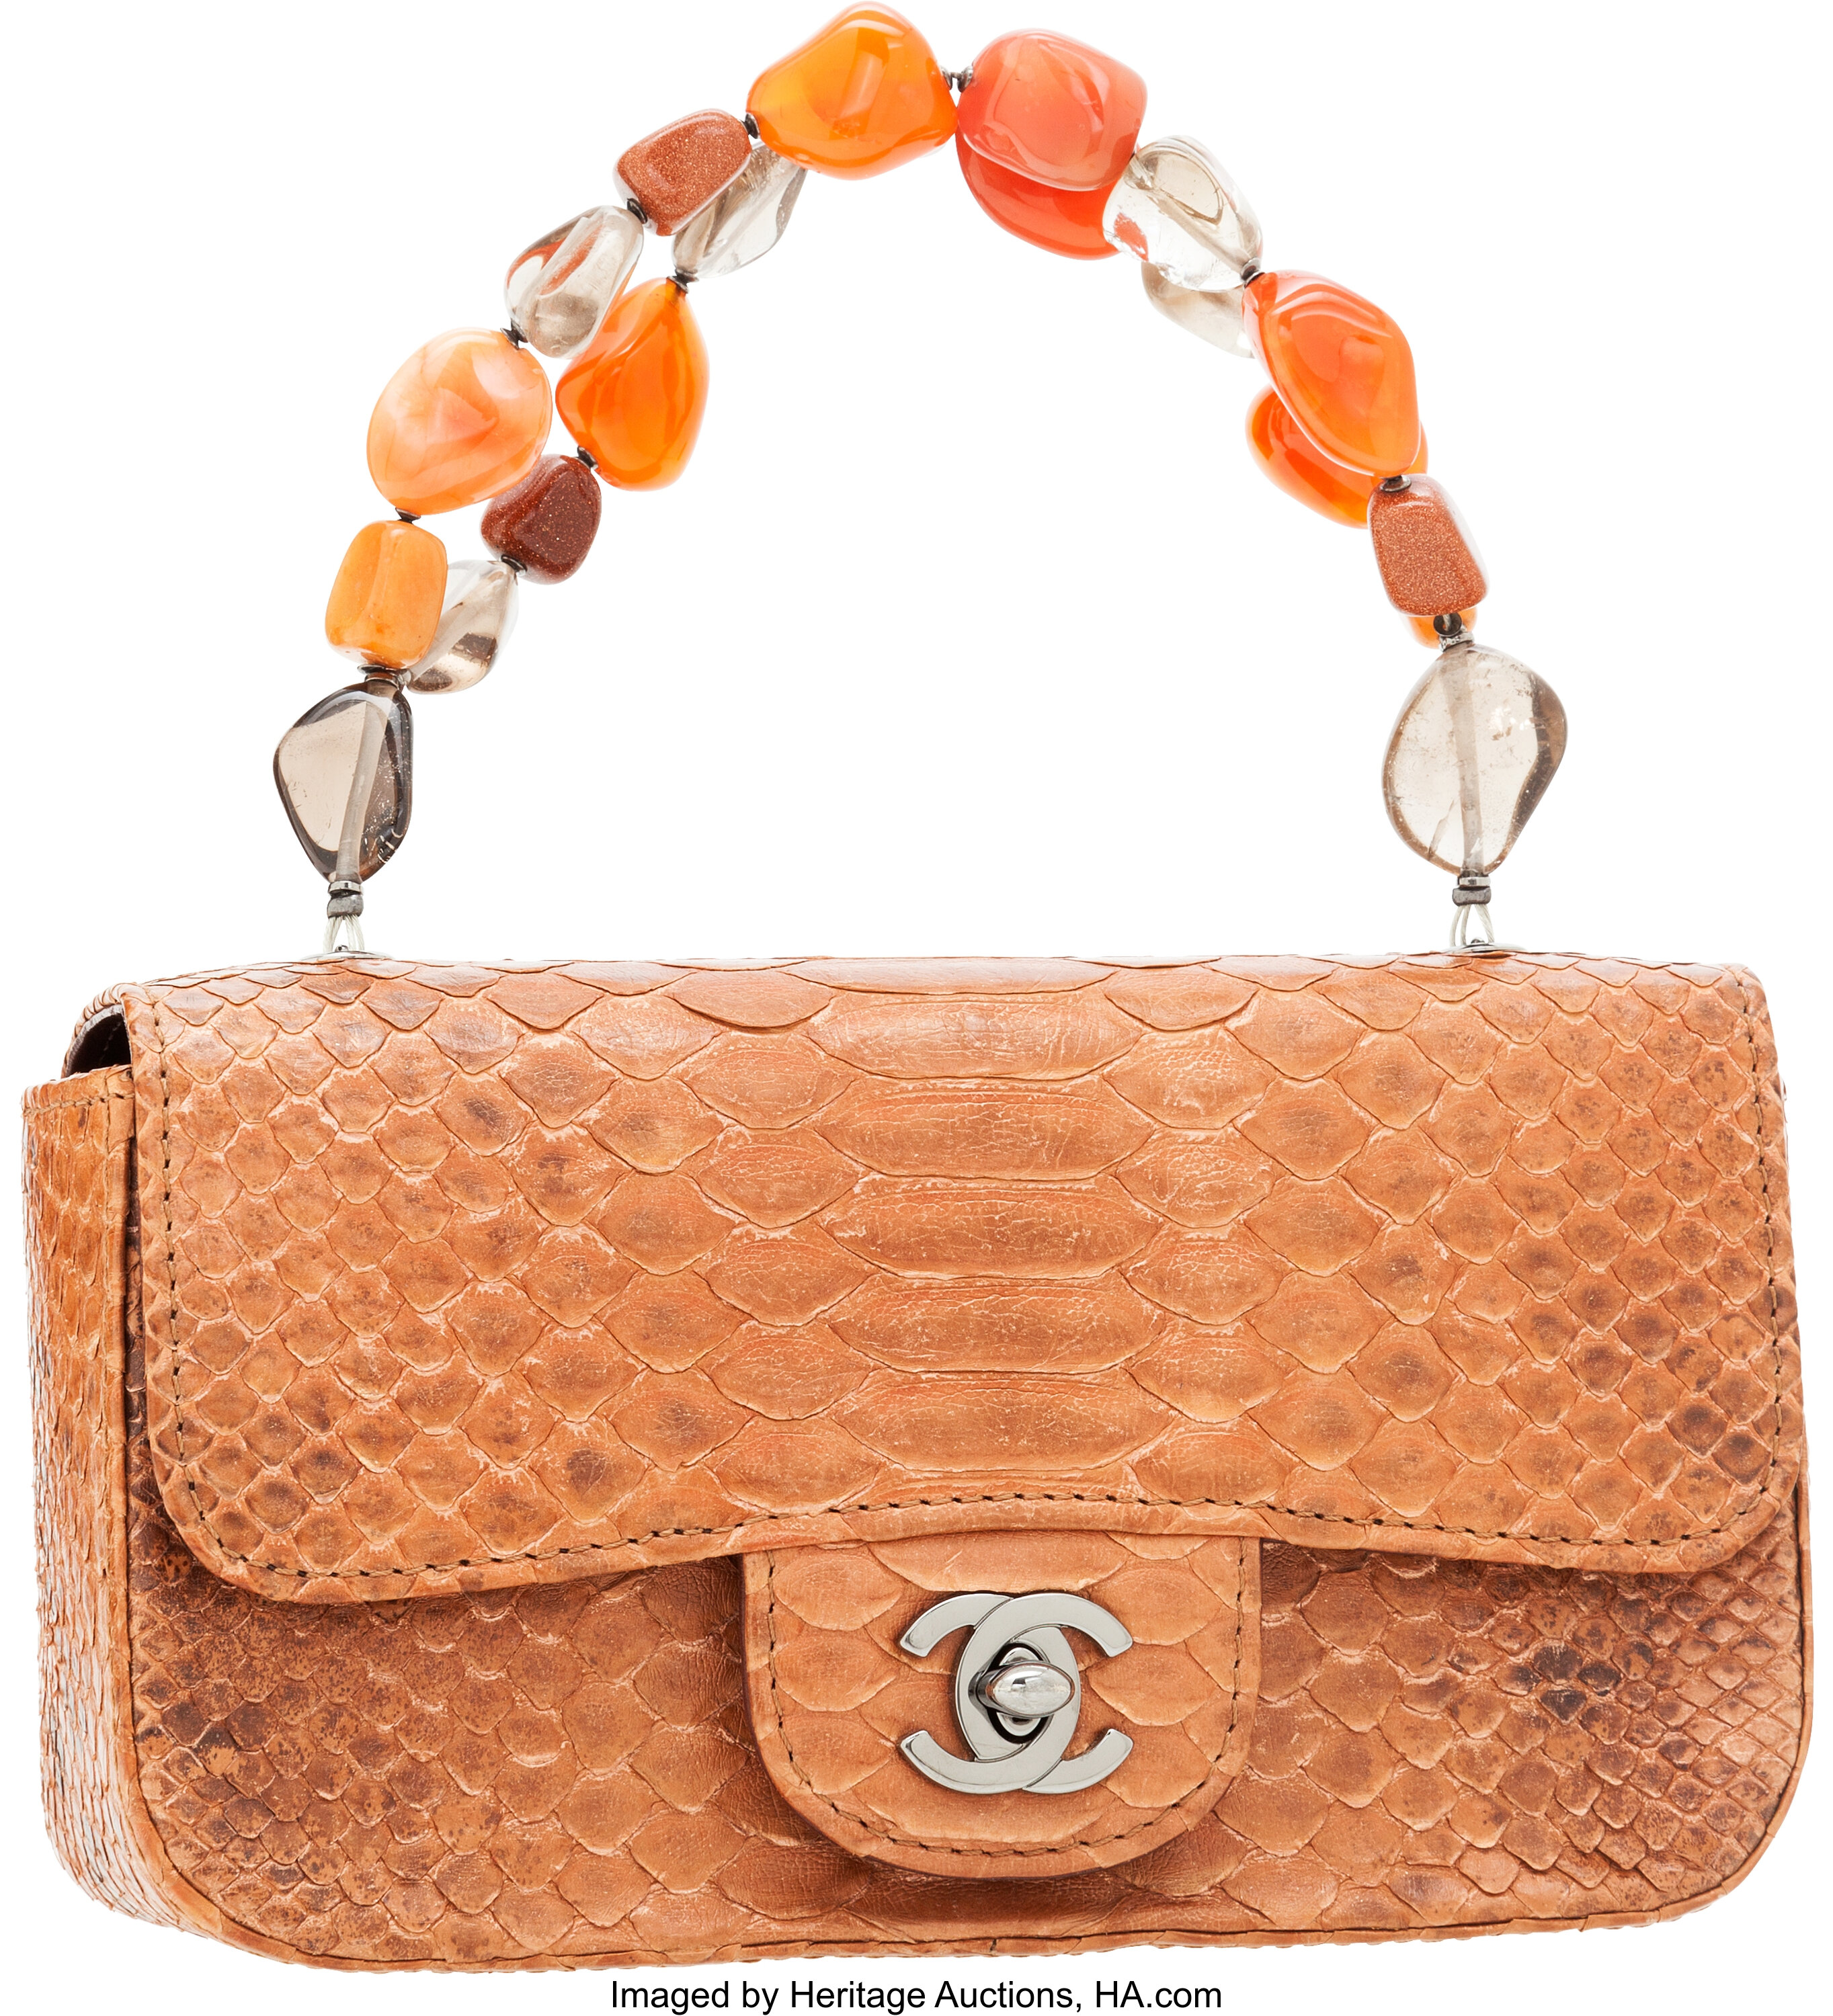 Chanel Copper Python Mini Flap Bag with Stone Top Handle. , Lot #56268